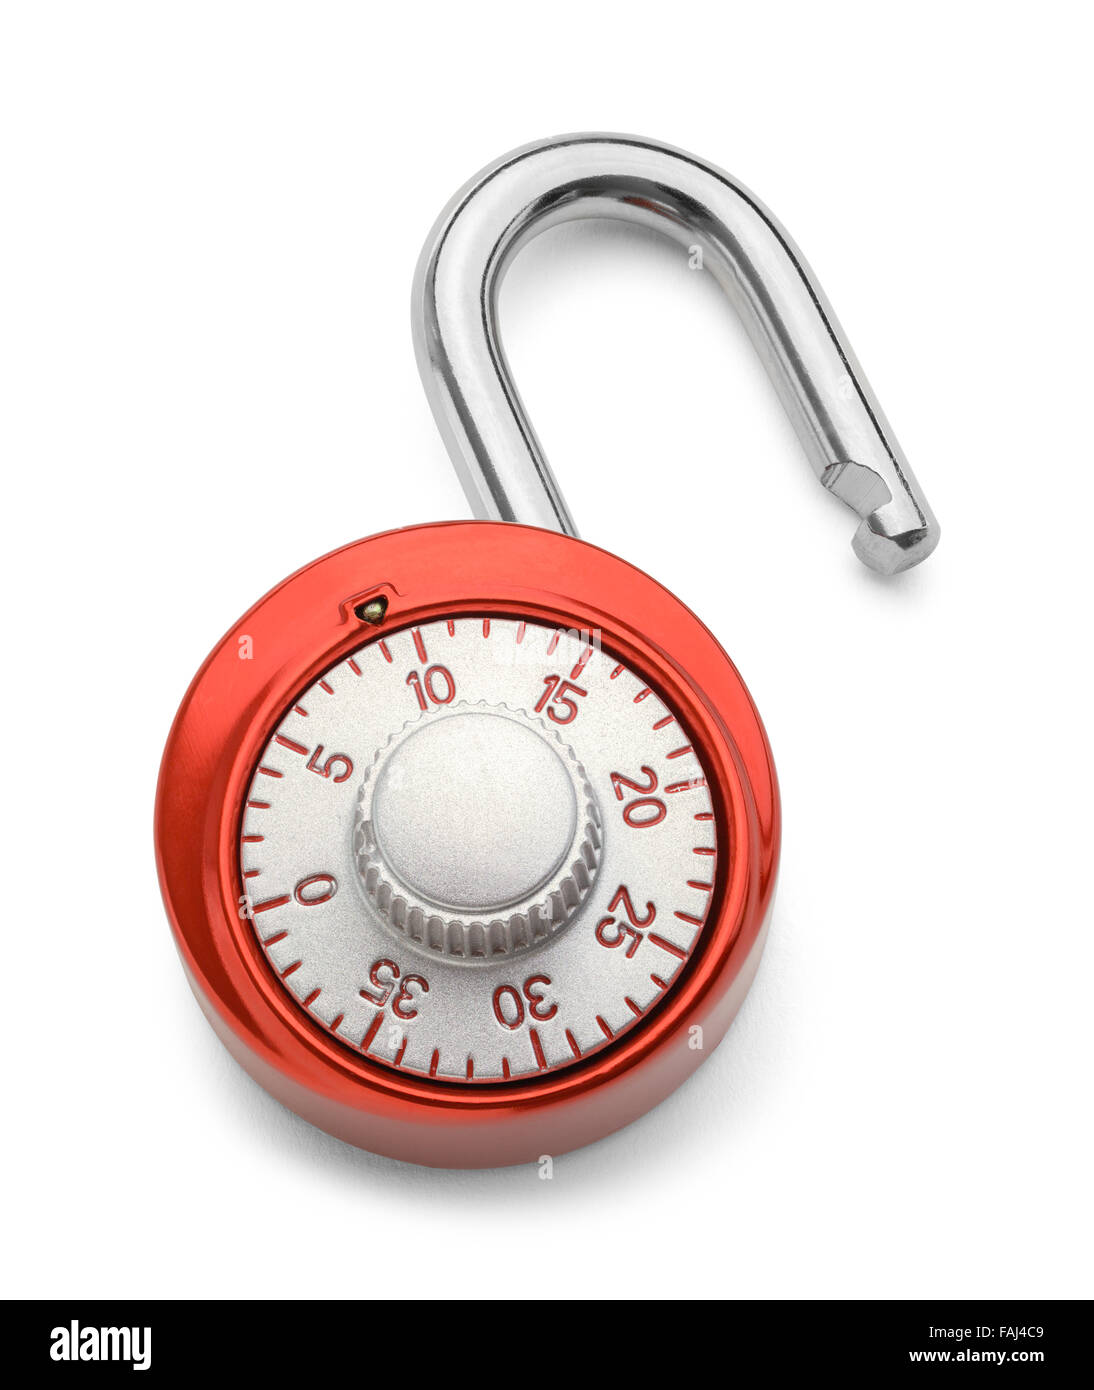 Open Red Combination Lock Isolated on a White Background. Stock Photo